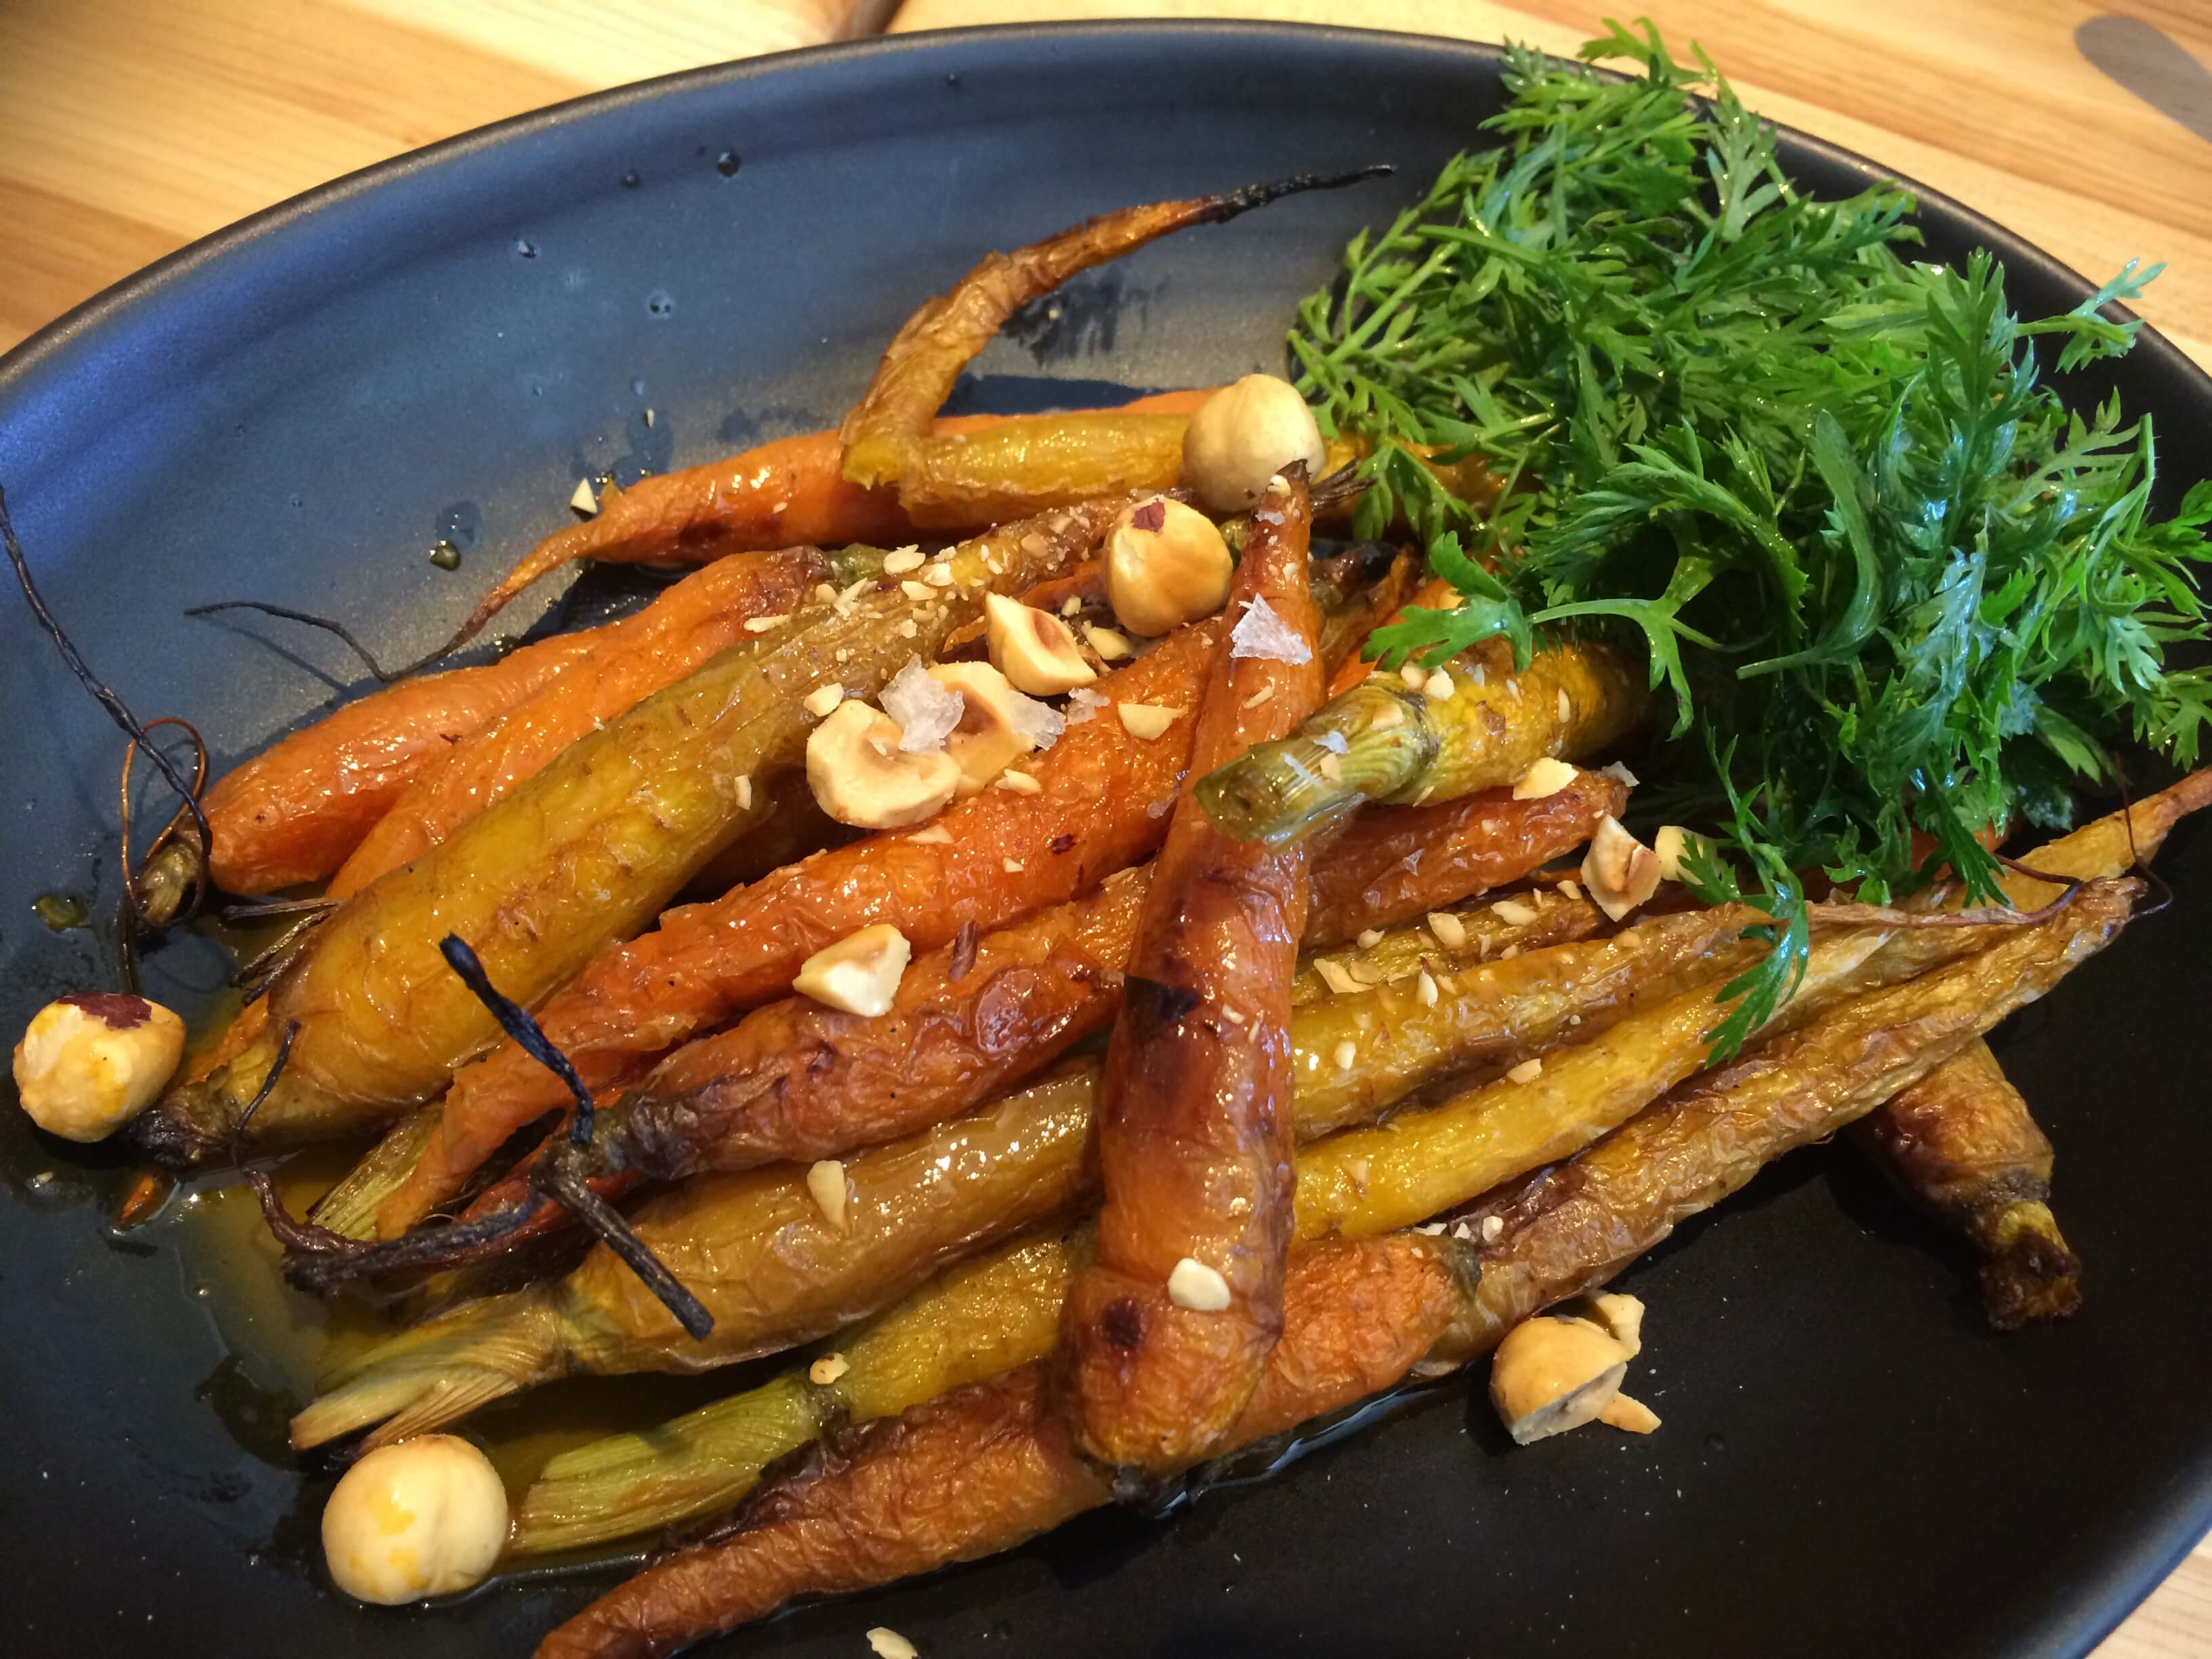 Roasted Carrots, Chamomile Carrot Jus, Carrot Top Salad, Hazelnuts